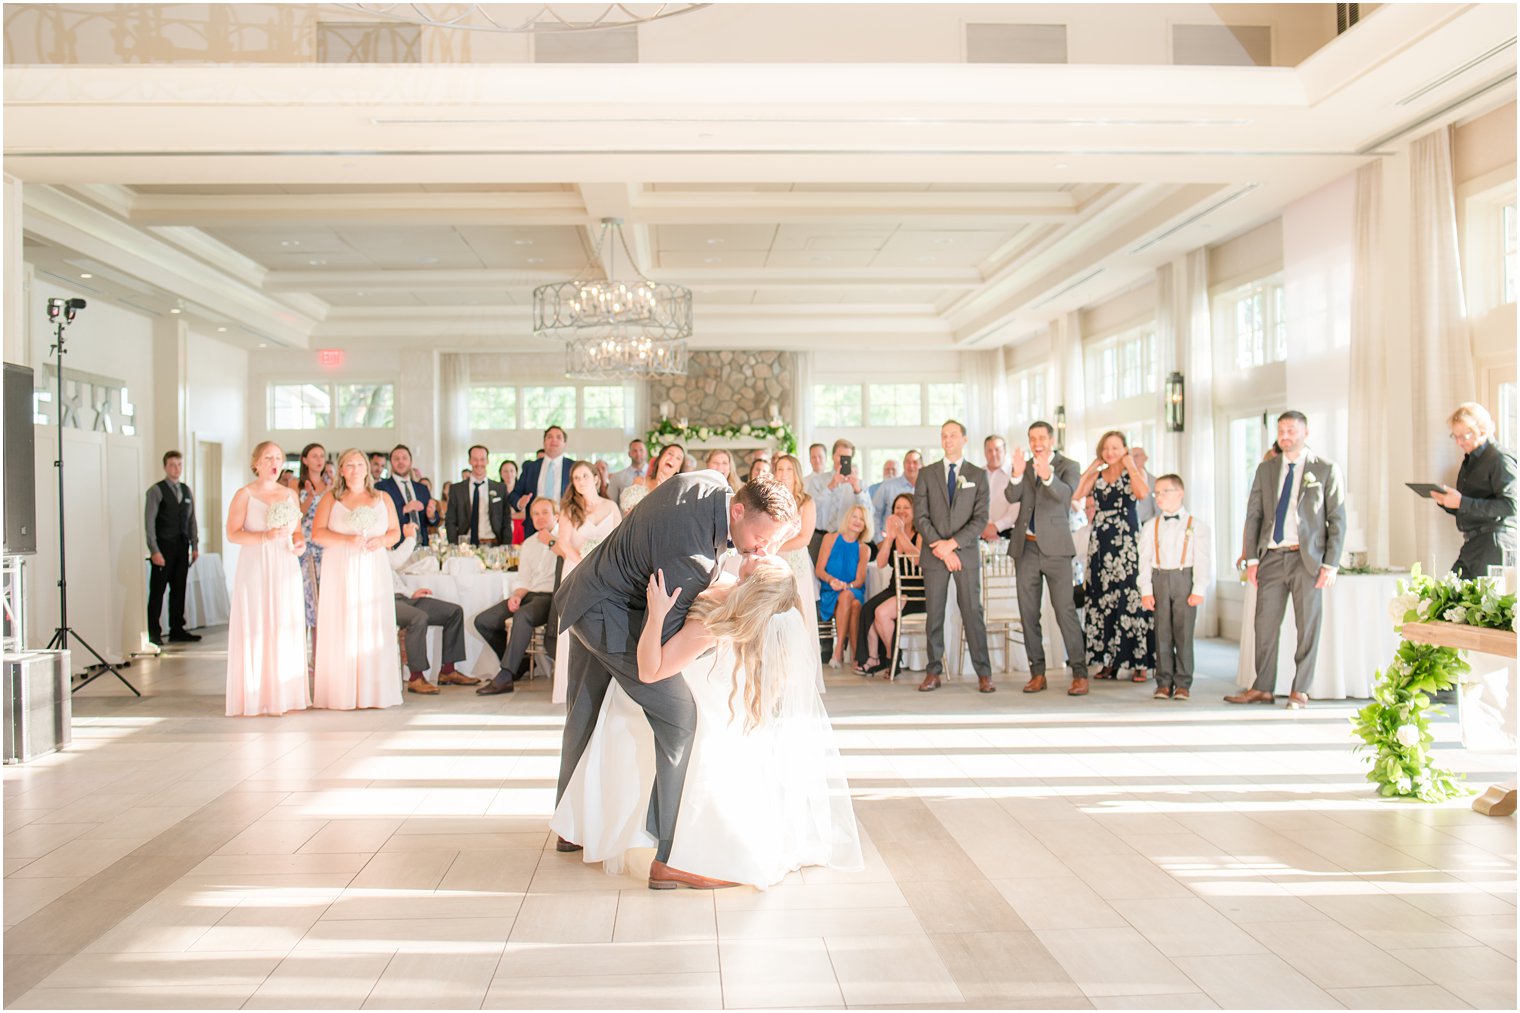 groom dips bride during first dance at New Jersey wedding reception